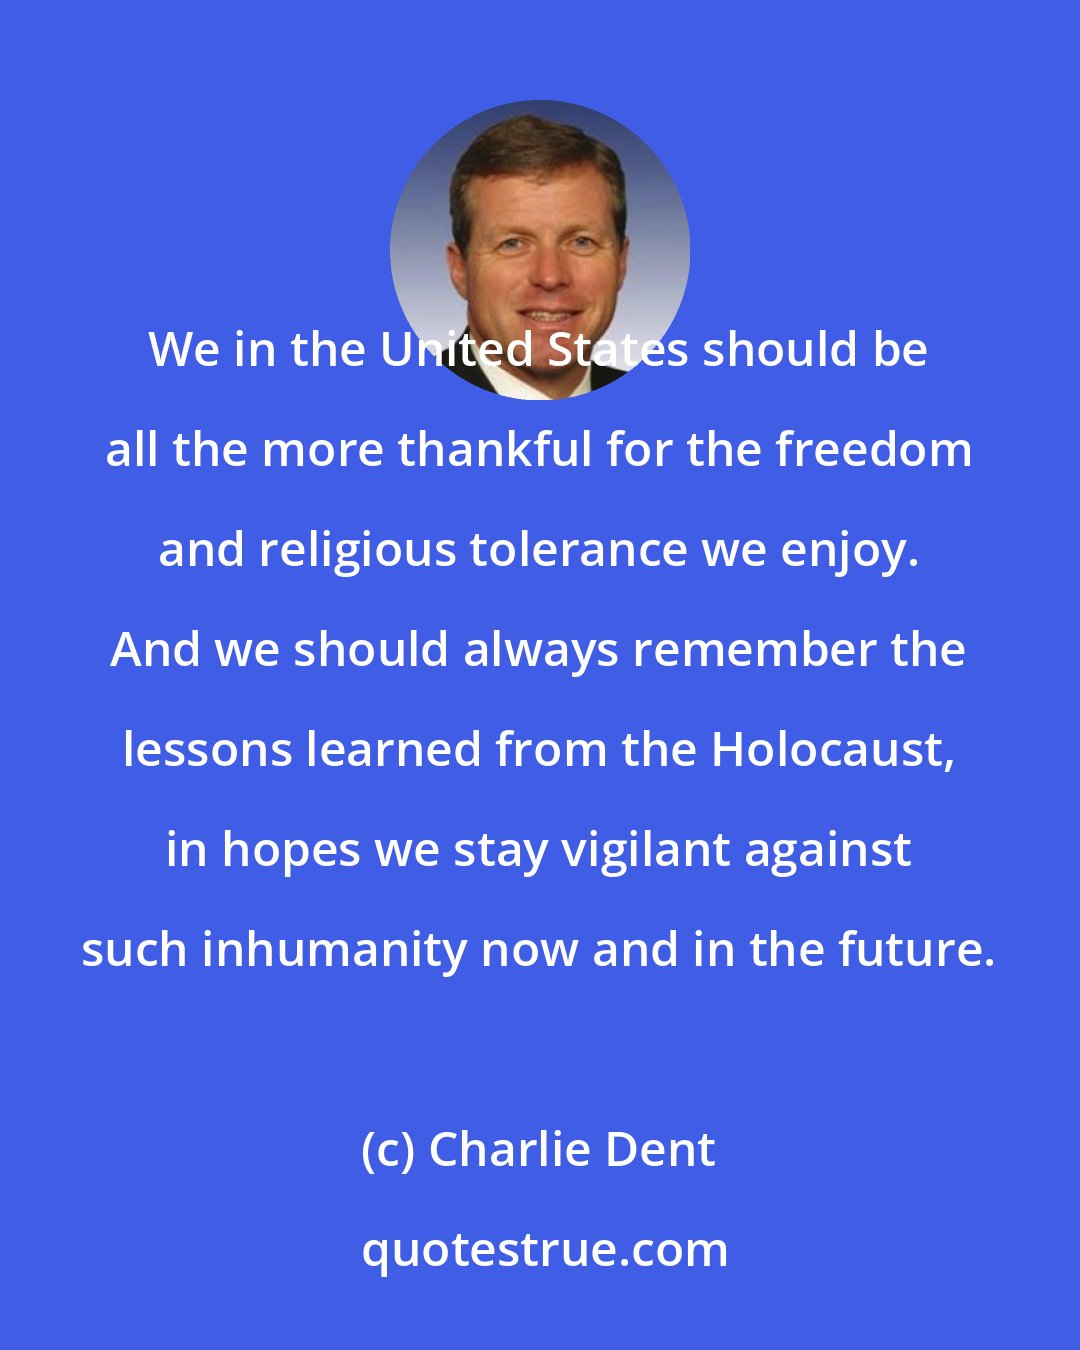 Charlie Dent: We in the United States should be all the more thankful for the freedom and religious tolerance we enjoy. And we should always remember the lessons learned from the Holocaust, in hopes we stay vigilant against such inhumanity now and in the future.